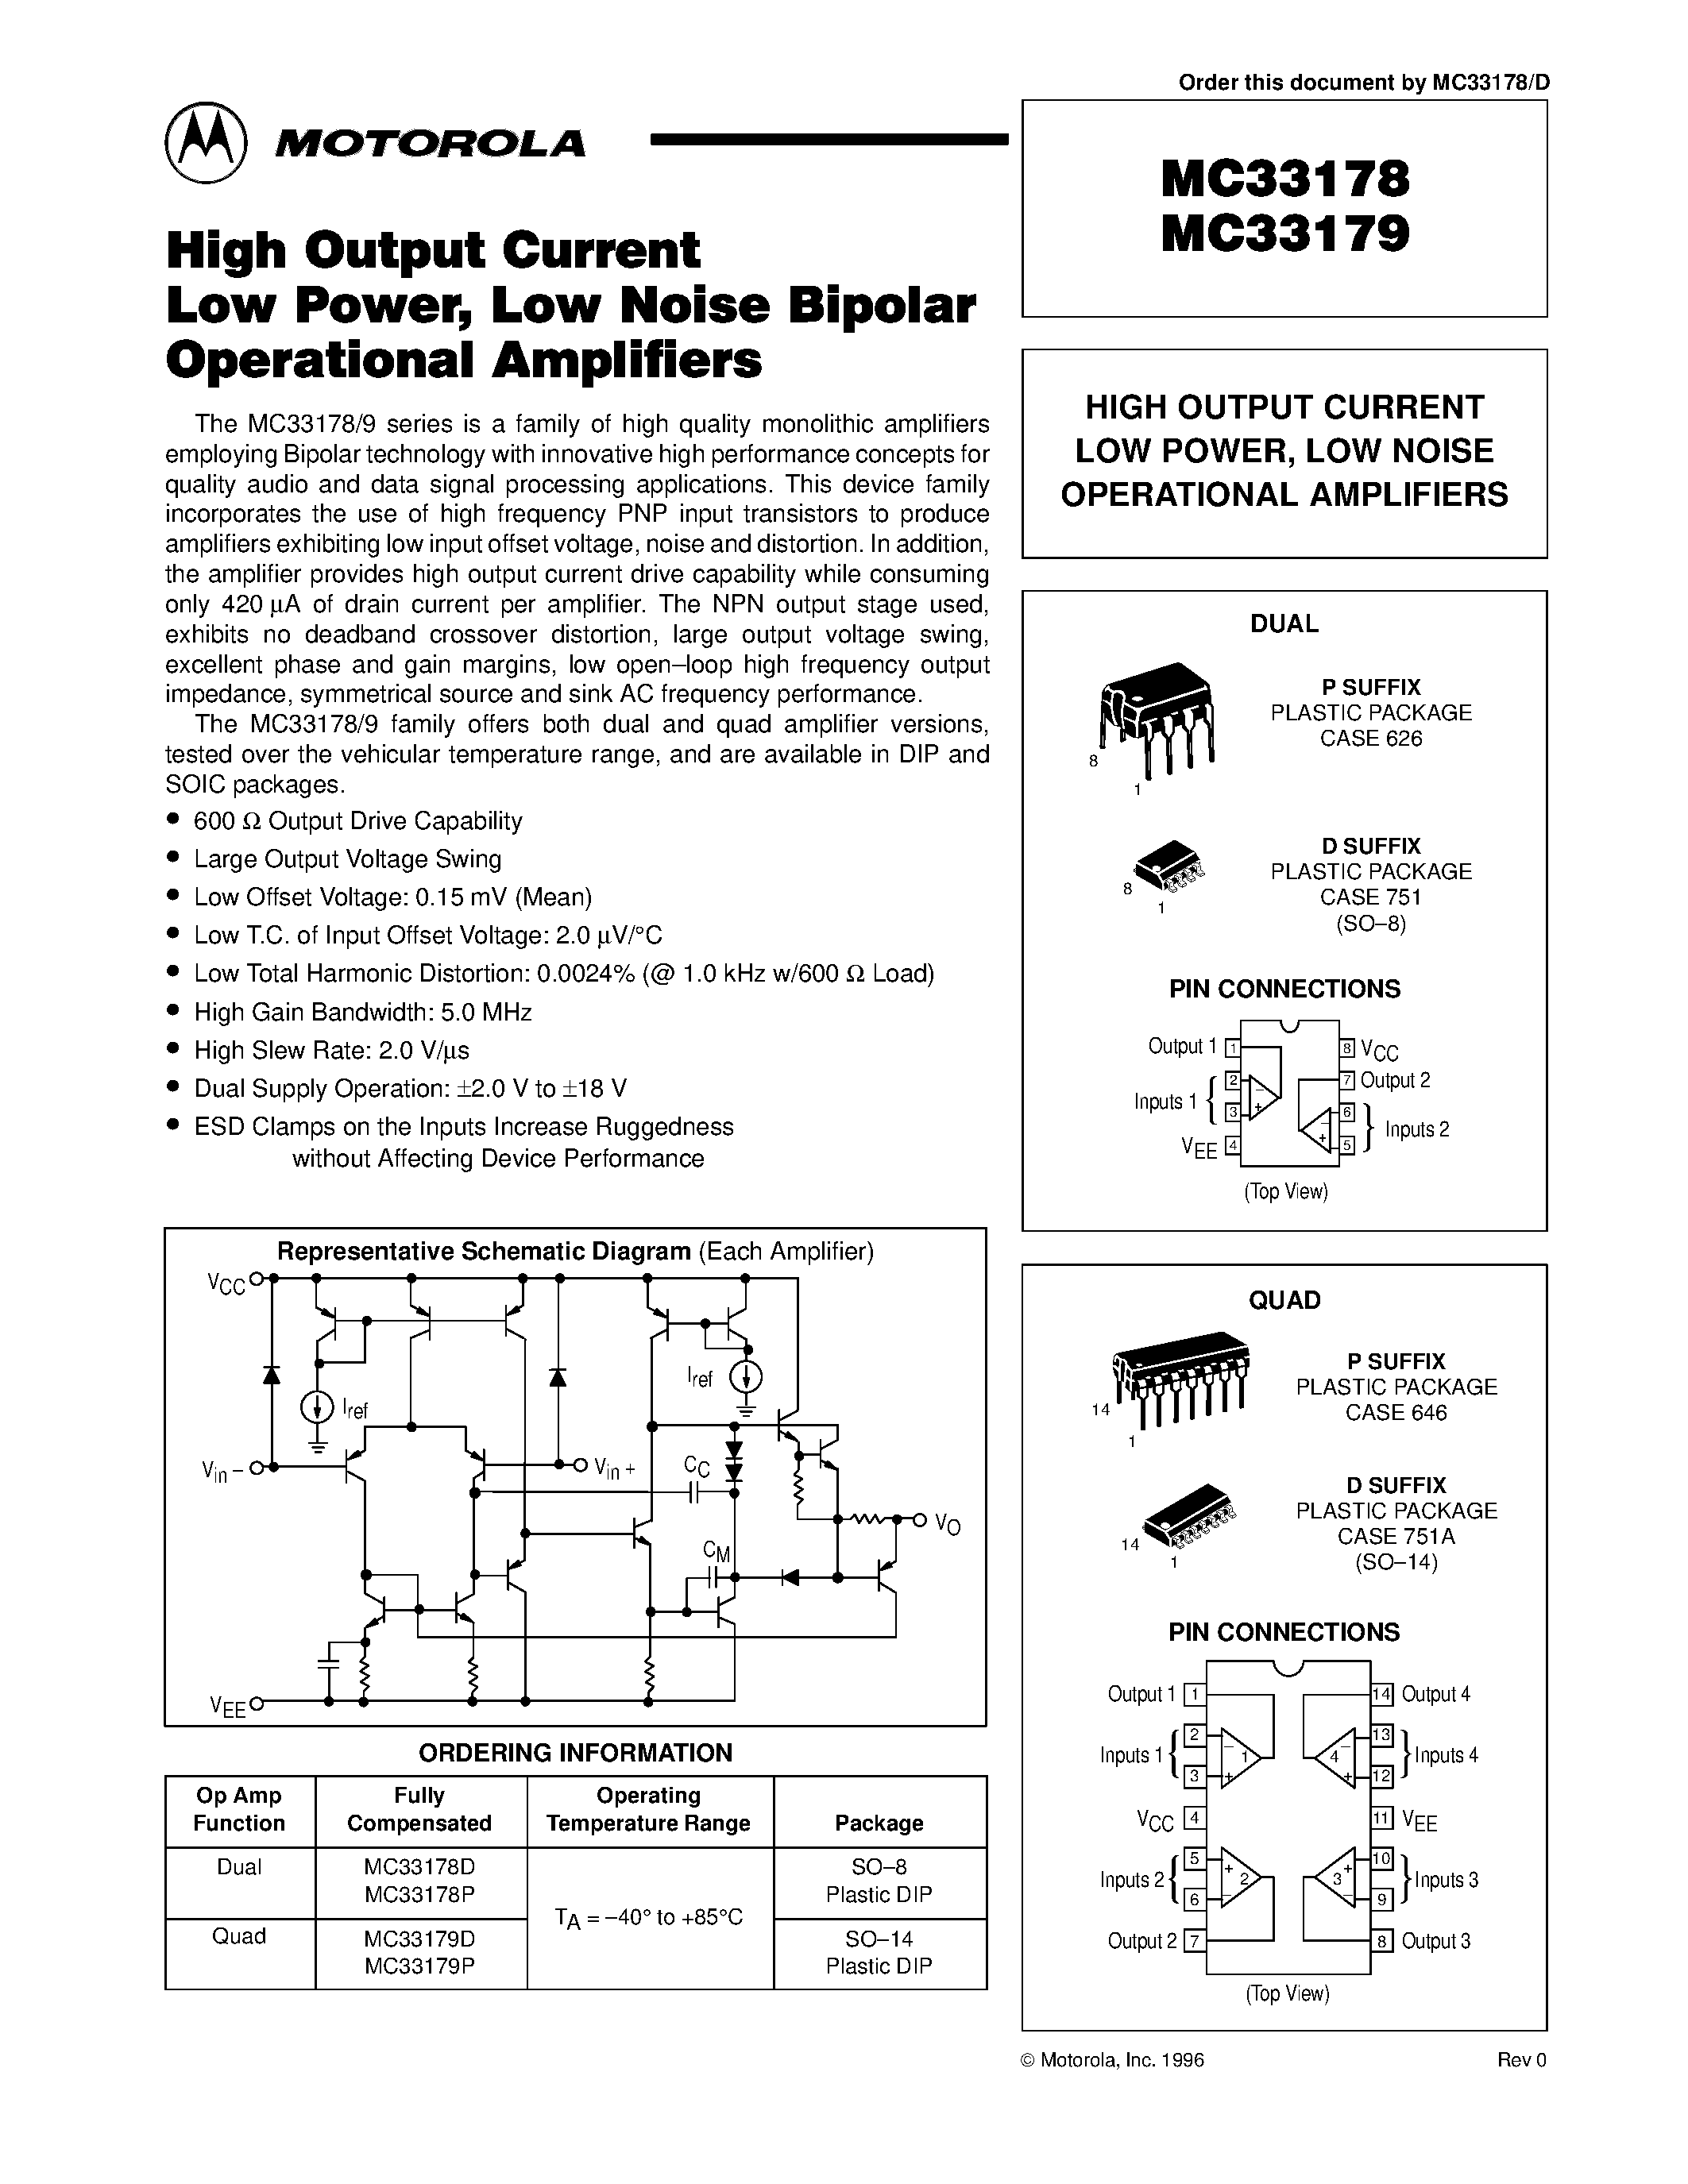 Datasheet MC33178 - (MC33179) HIGH OUTPUT CURRENT LOW POWER / LOW NOISE OPERATIONAL AMPLIFIERS page 1